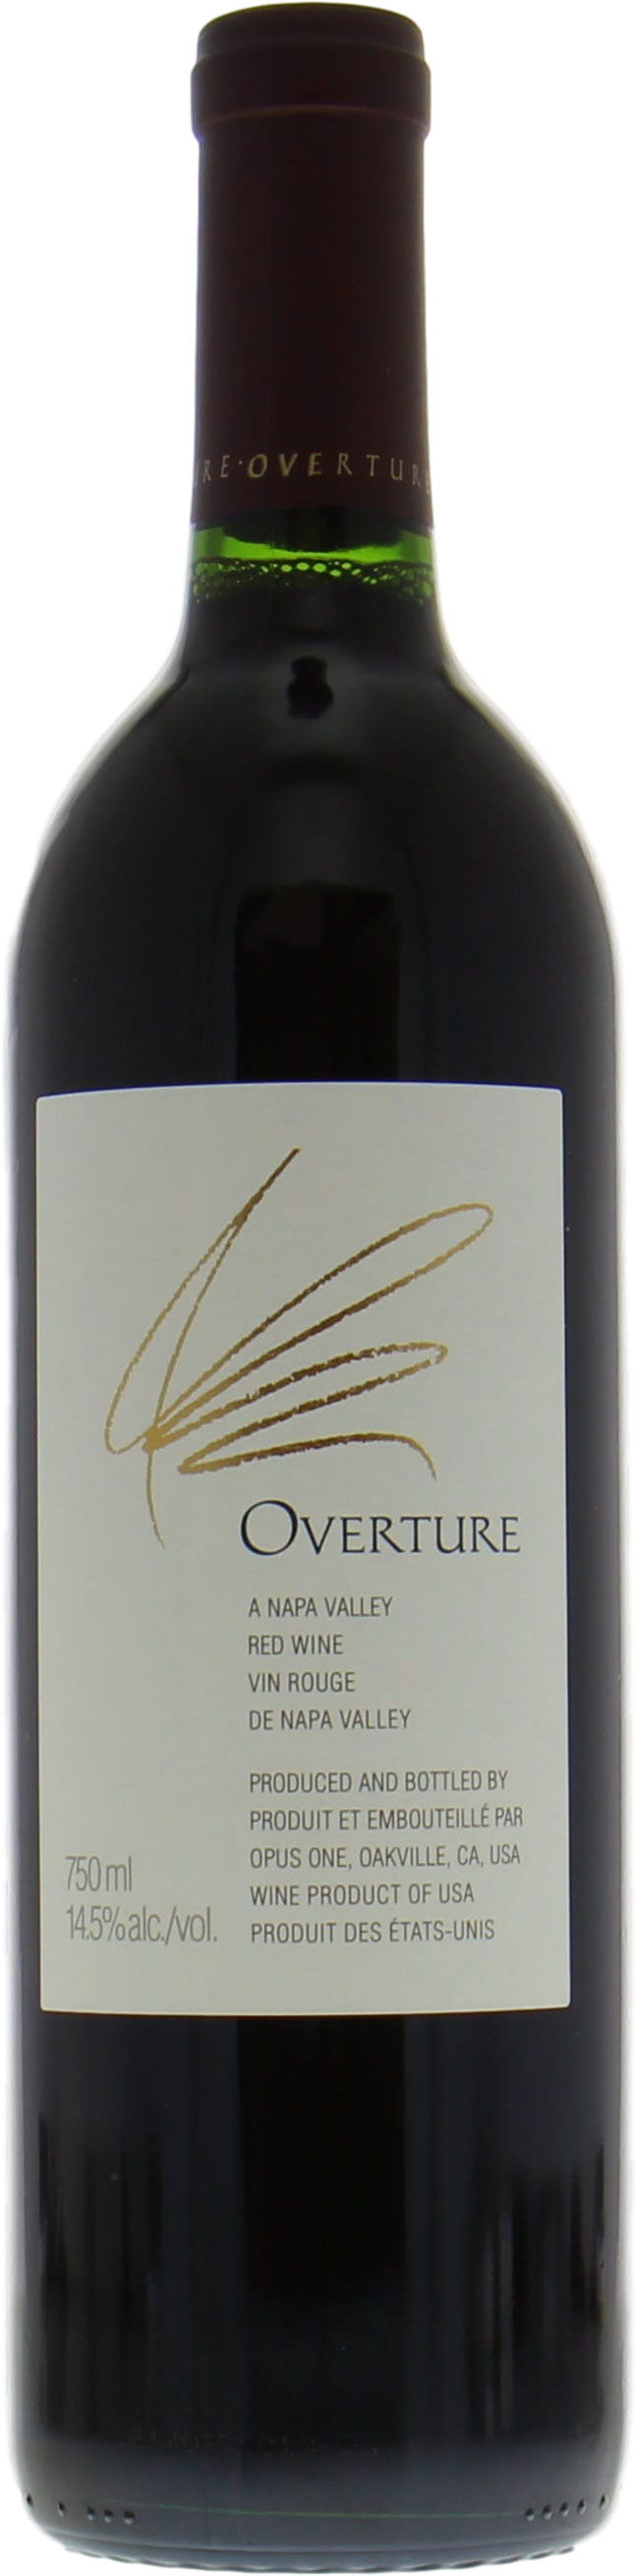 Opus One - Overture release 2016 2016